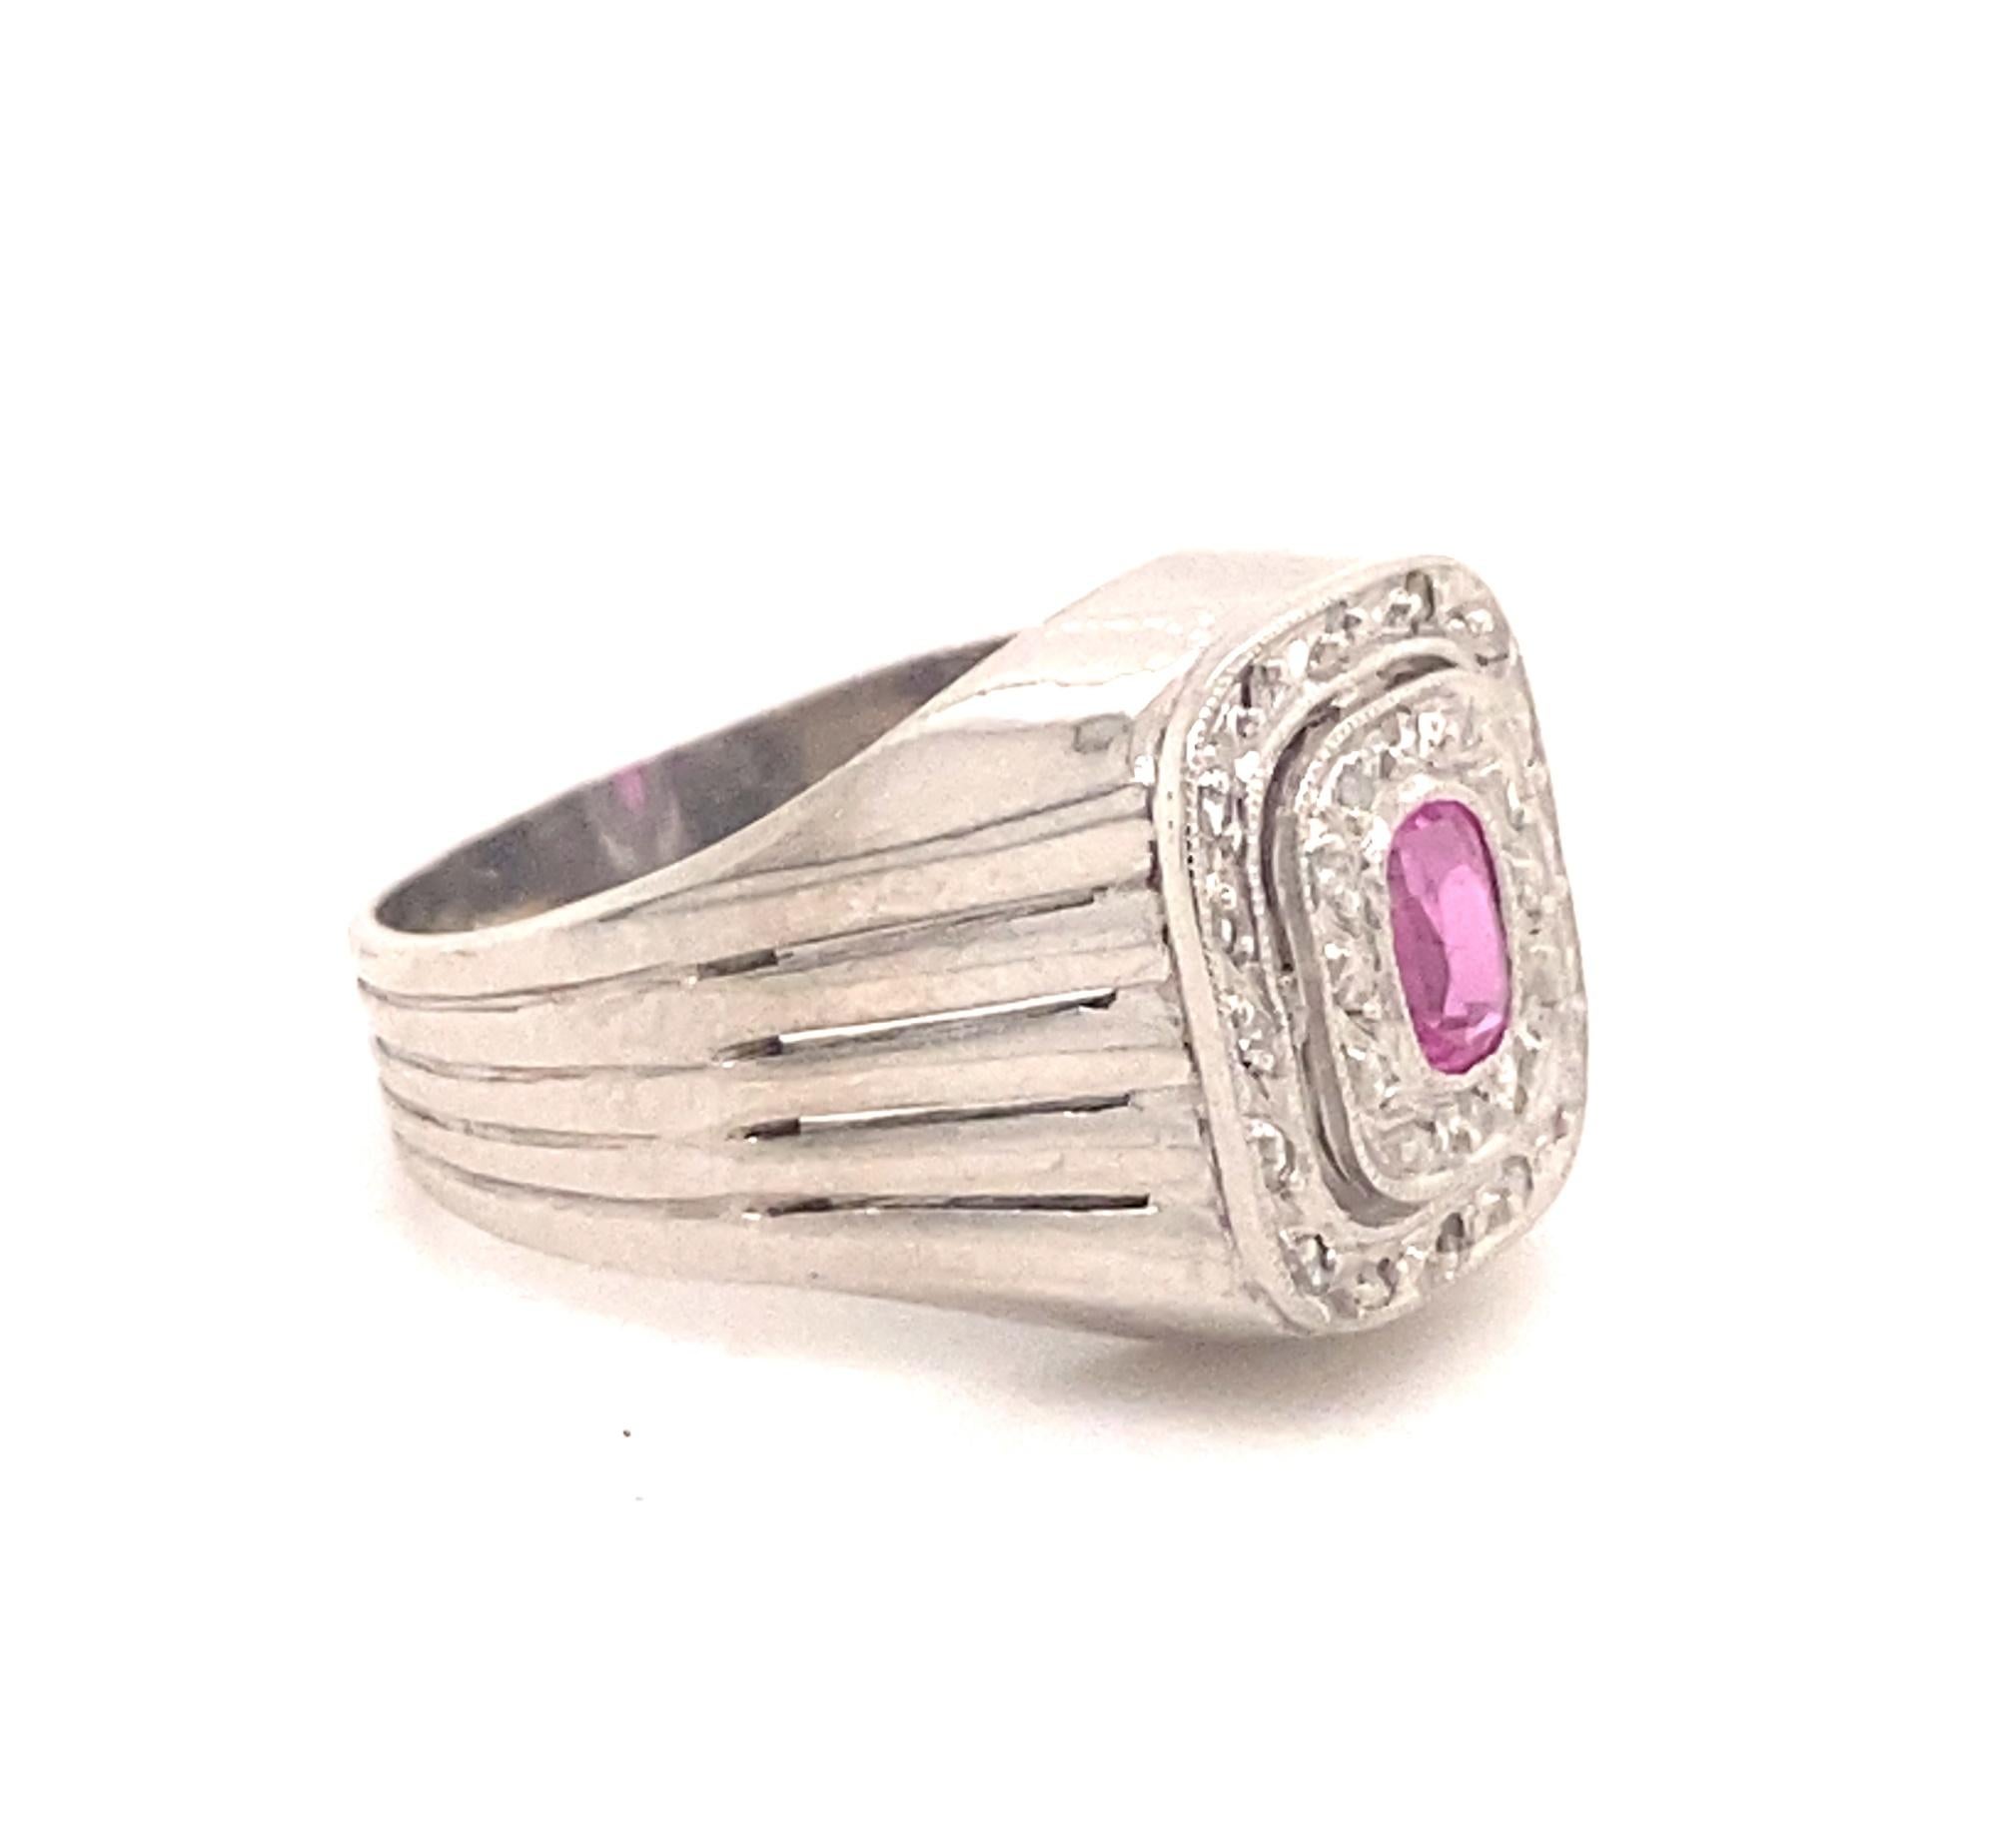 Stunning original Art Deco ring c.1930 set with an oval shaped pink tourmaline and rose cut diamonds in 18K white gold.  The natural pink tourmaline has amazing color and clarity estimated weight .30 carats. There are 30 rose cut diamonds I color